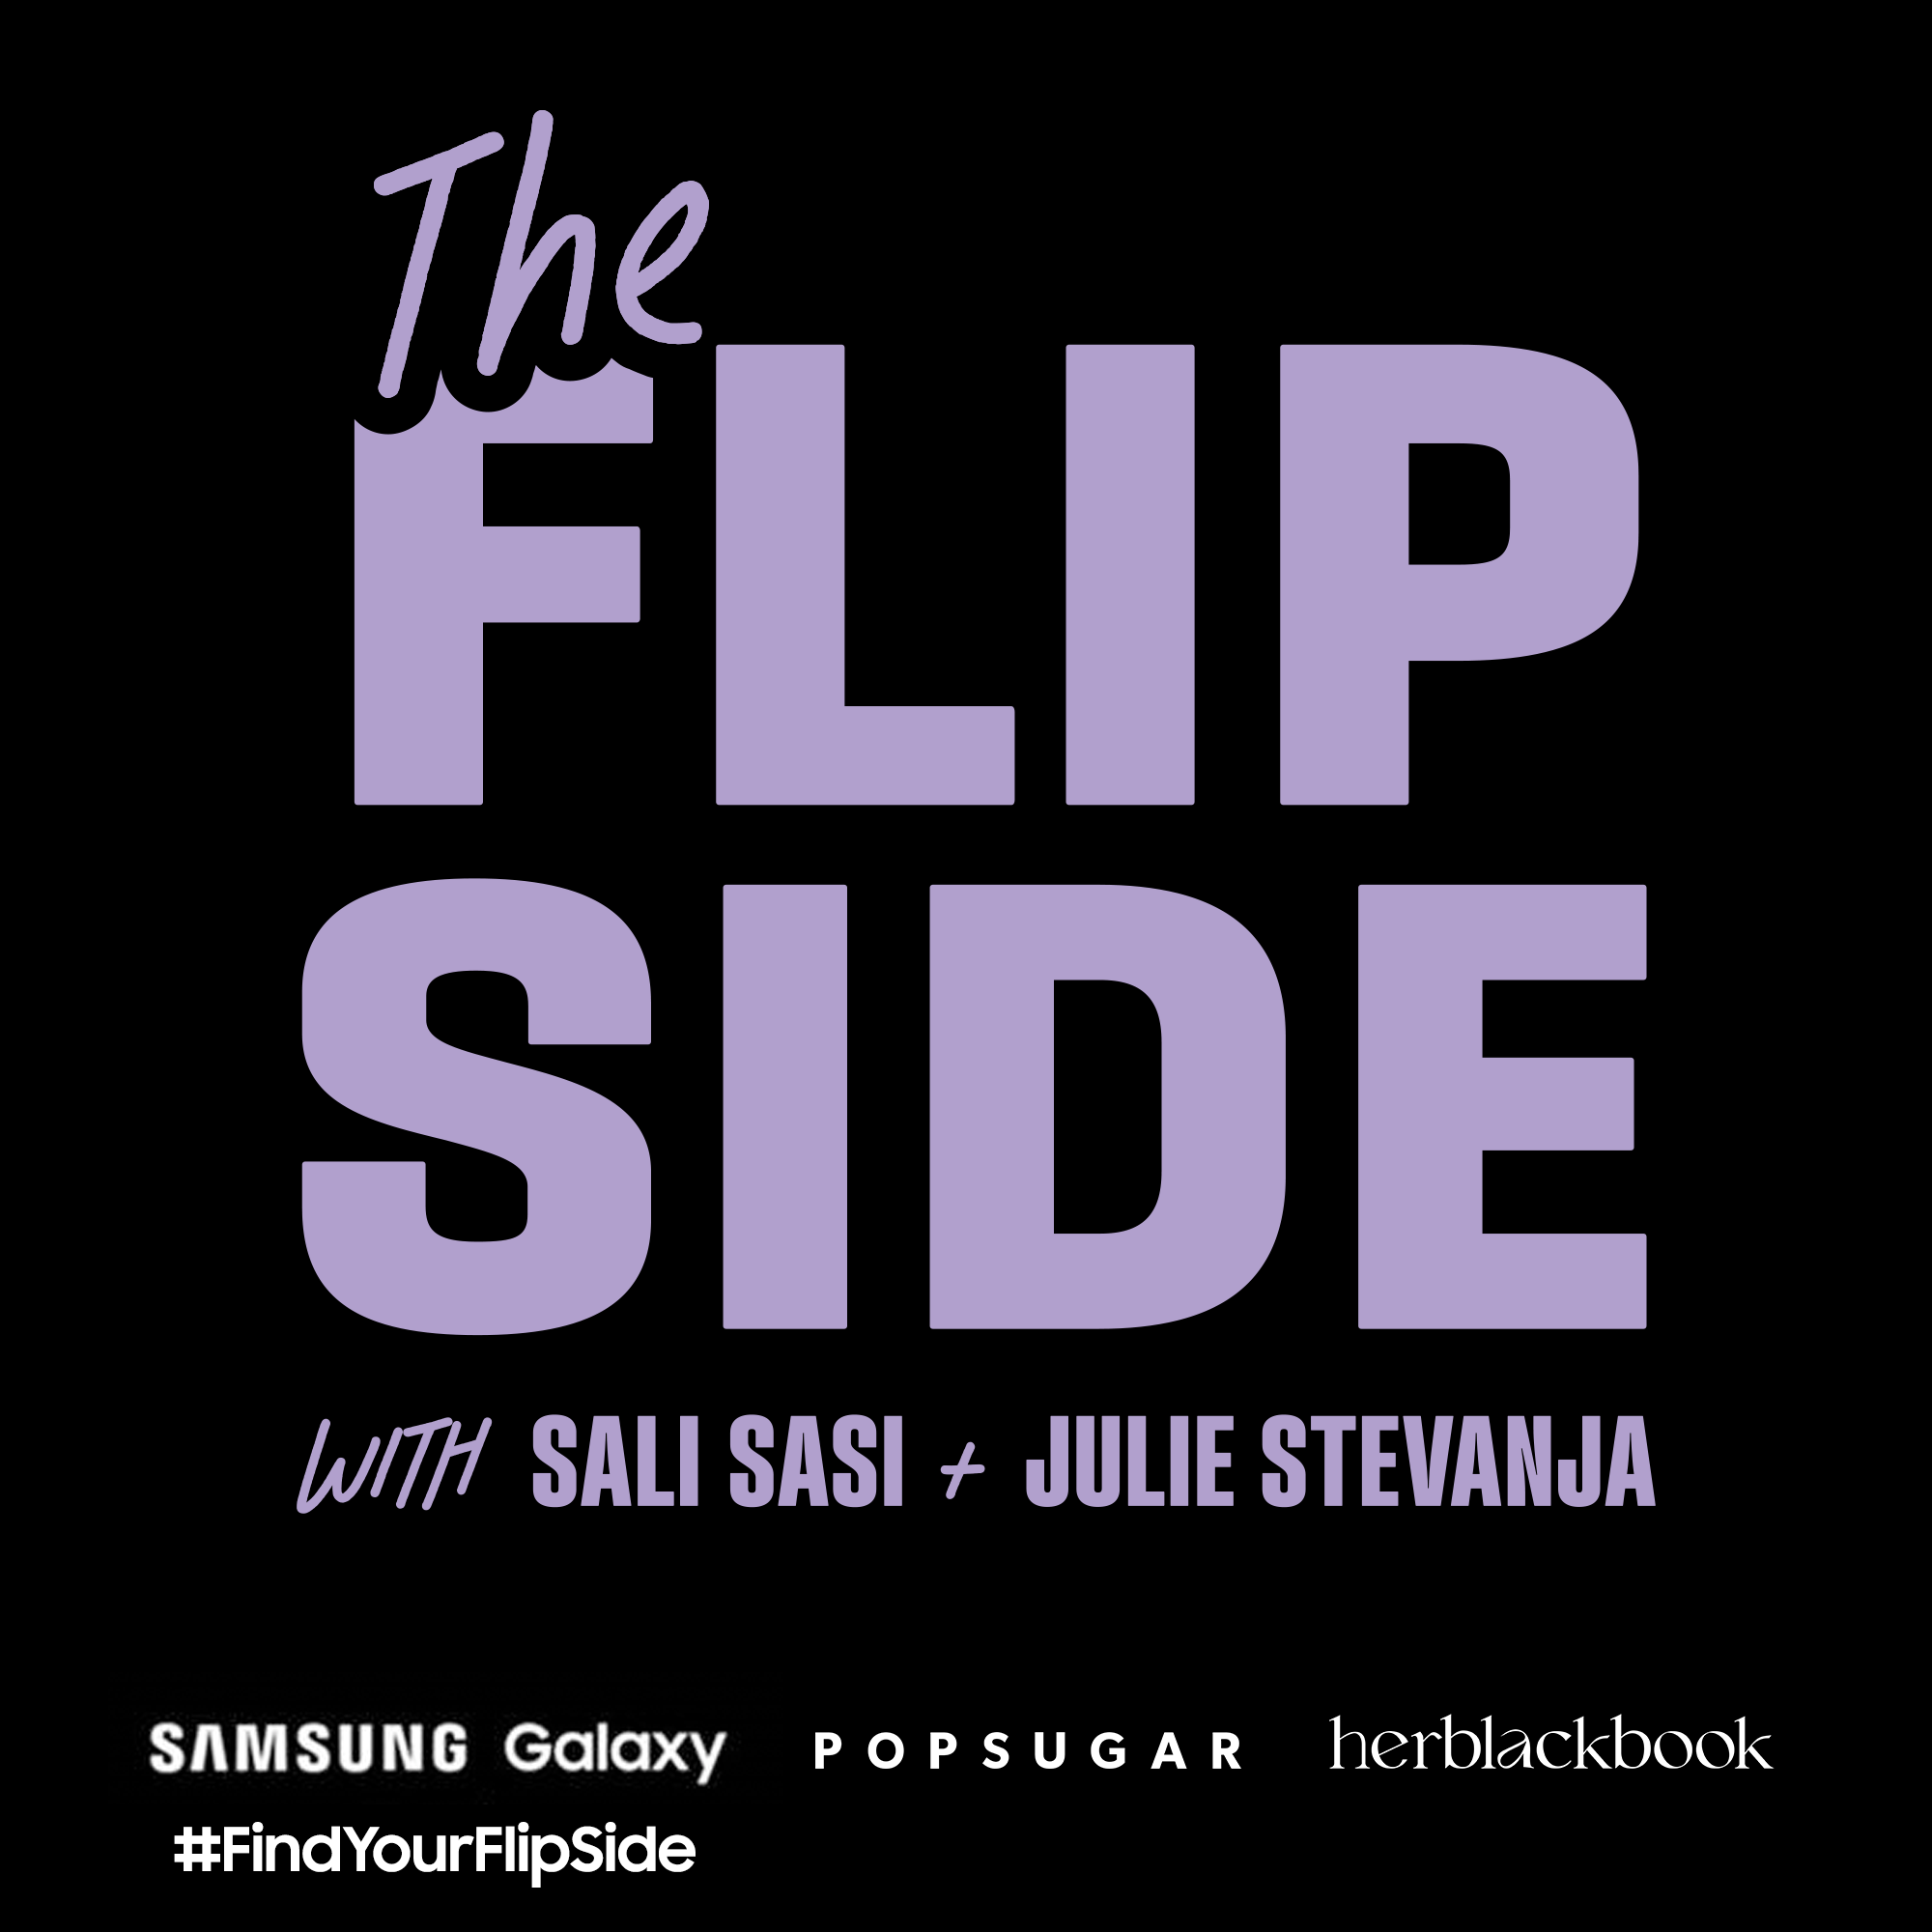 The Flipside, Featuring Michelle Battersby and Lucy Mort